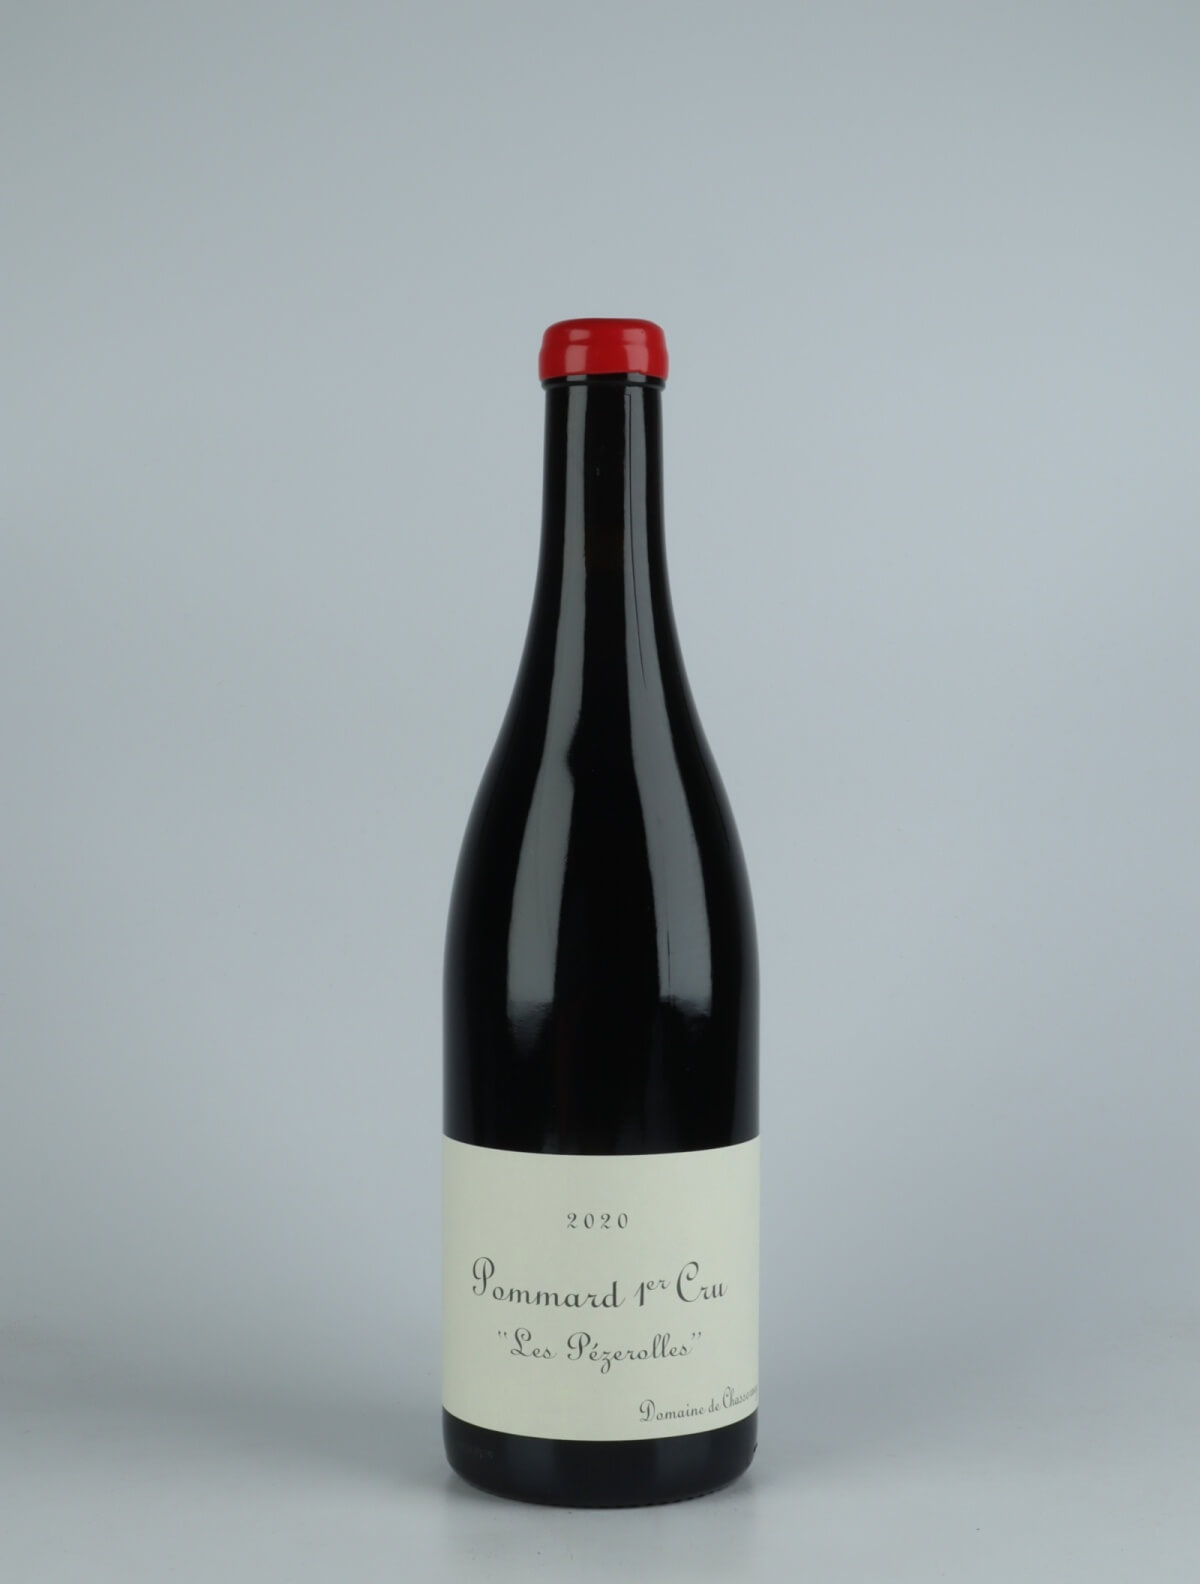 A bottle 2020 Pommard 1. Cru Les Pezzerolles Red wine from Domaine de Chassorney, Burgundy in France